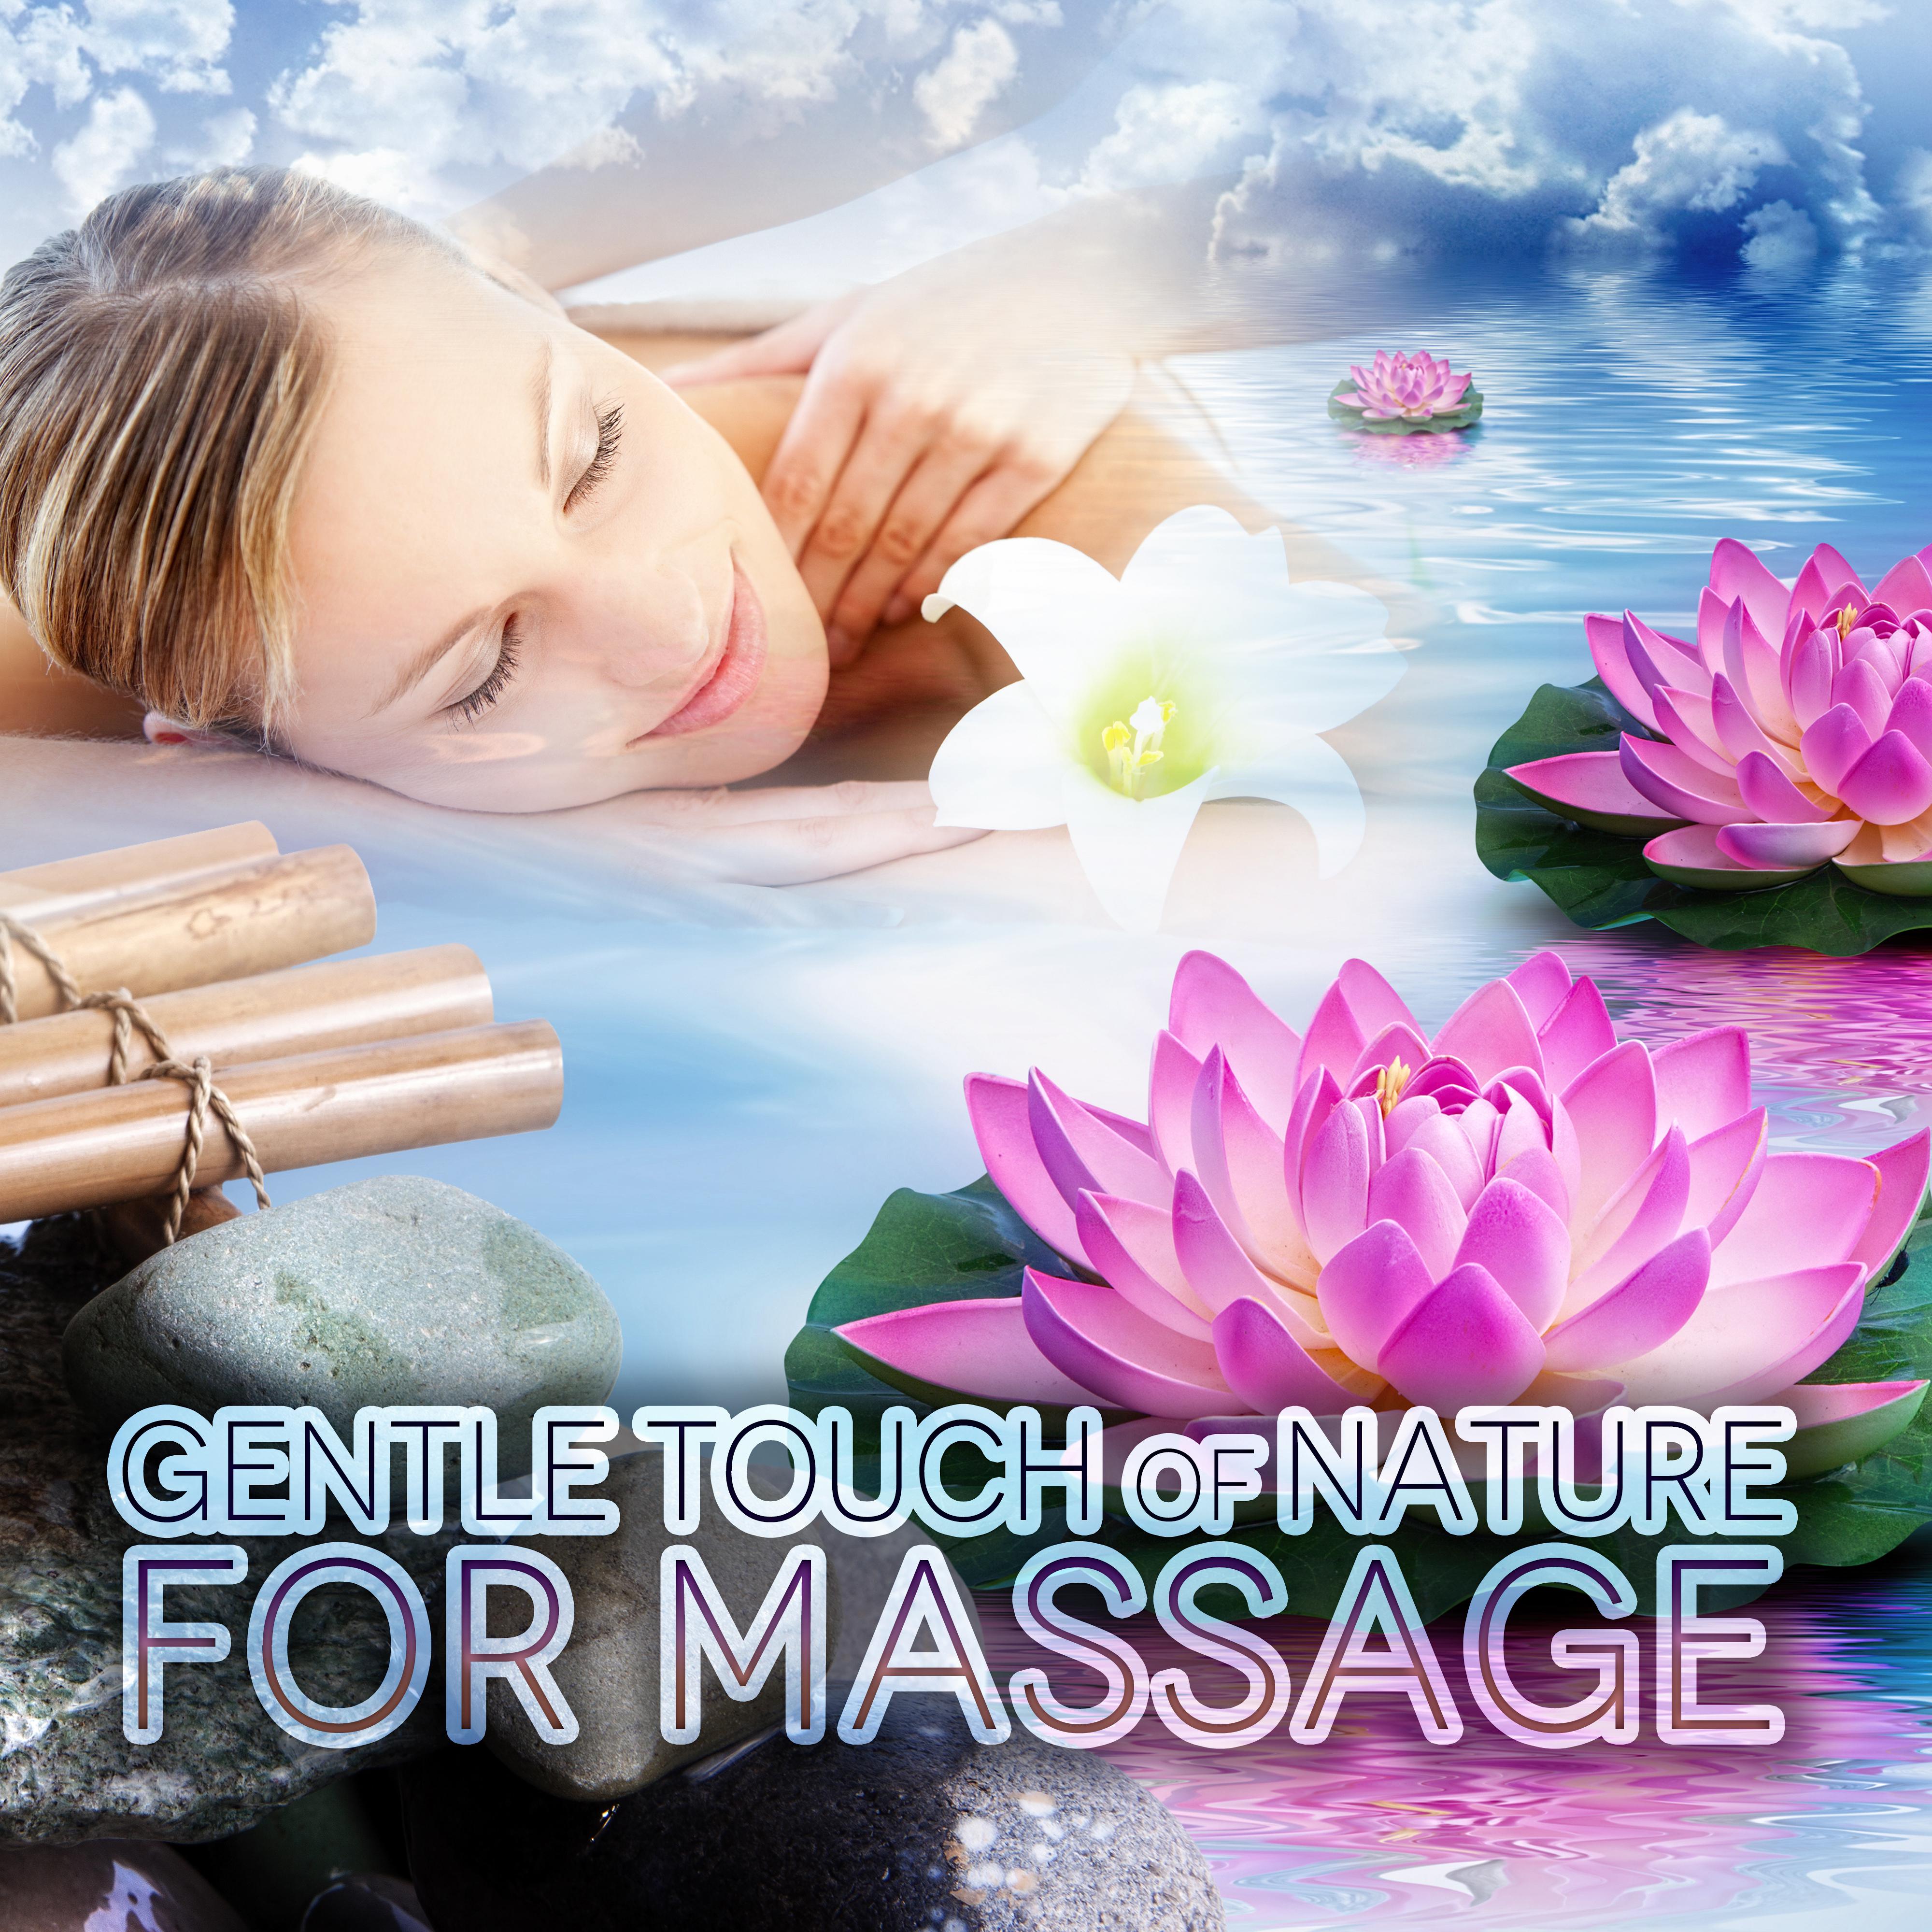 Gentle Touch of Nature for Massage  Soft Music to Relax, Songs for Spa, Relaxing Sounds, Massage Music, Wellness